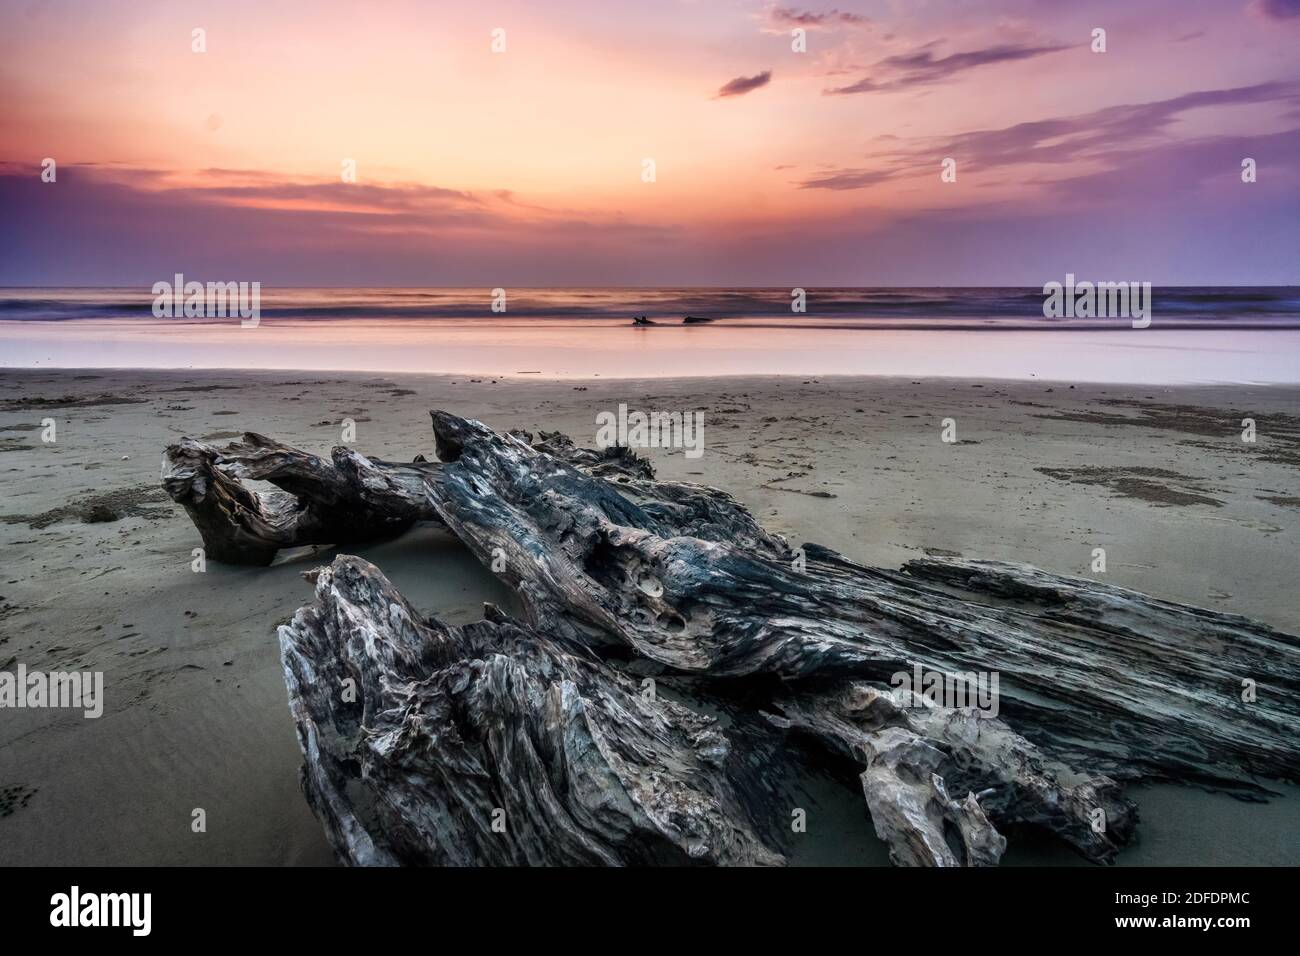 Drifted Wood at Beach Against Twilight Sunset View Stock Photo